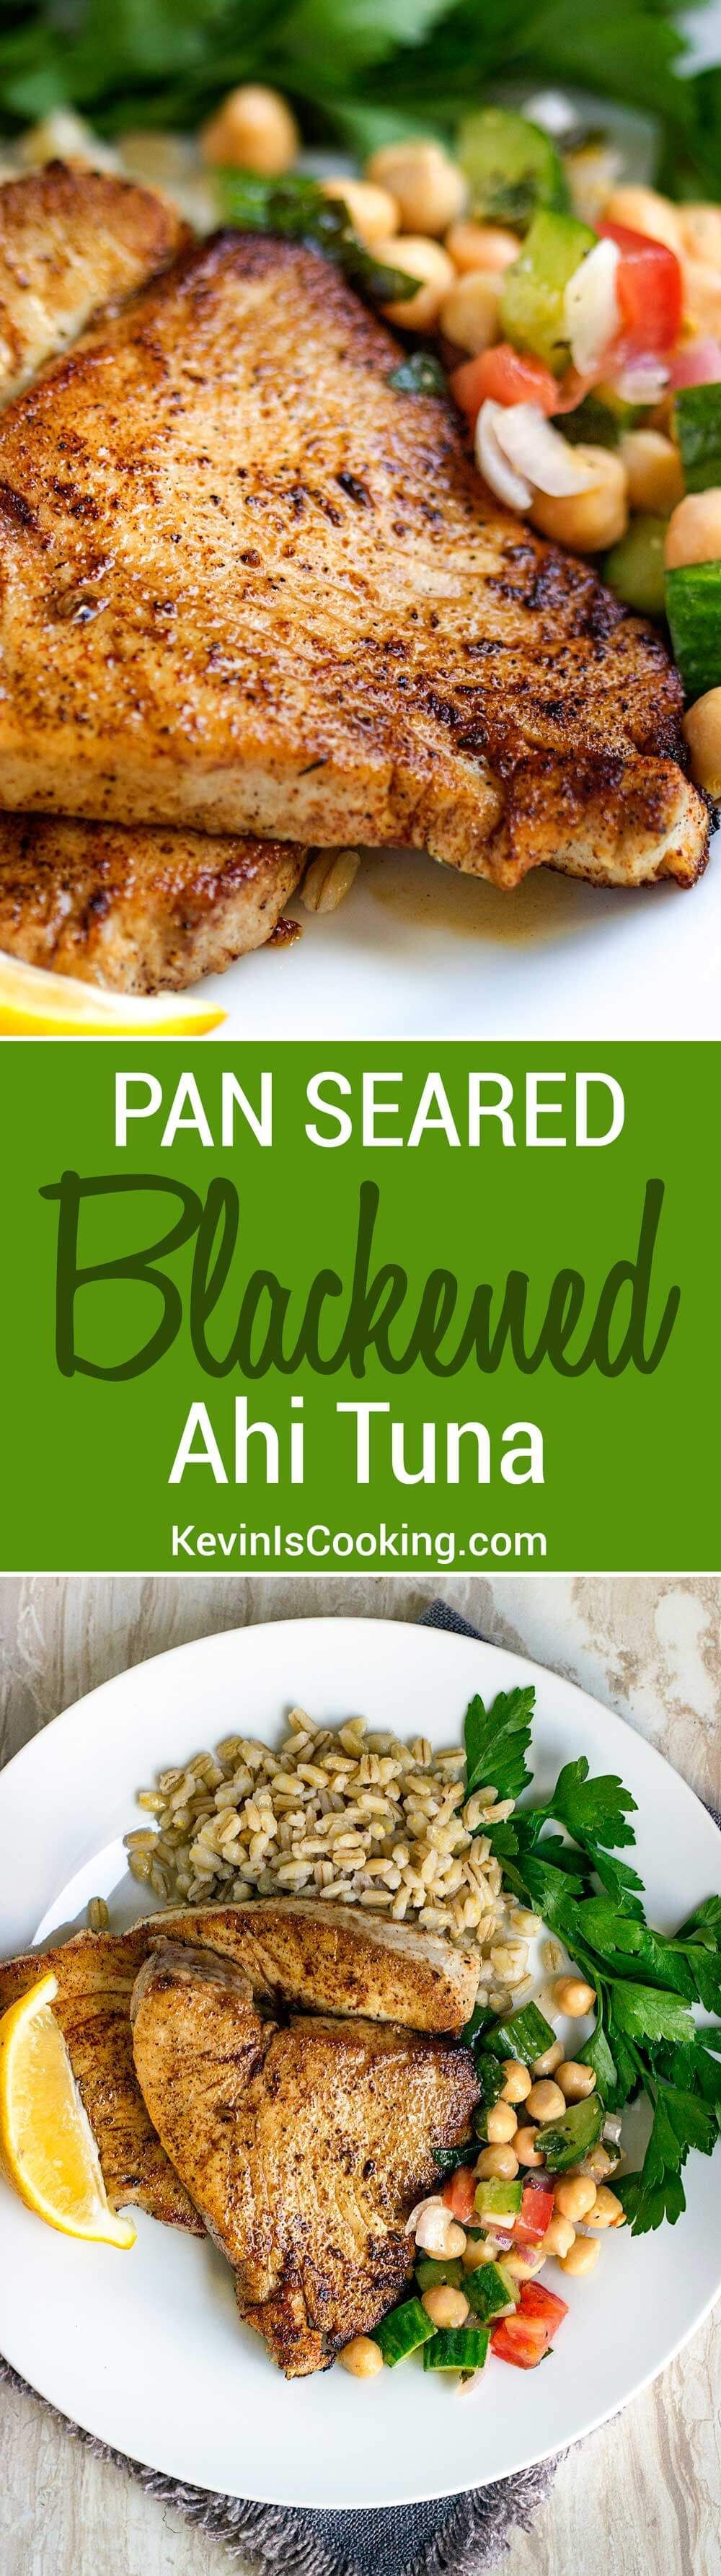 This Pan Seared Blackened Ahi Tuna is a family go to for a quick and healthy dinner. Just the right amount of spice and heat, too!